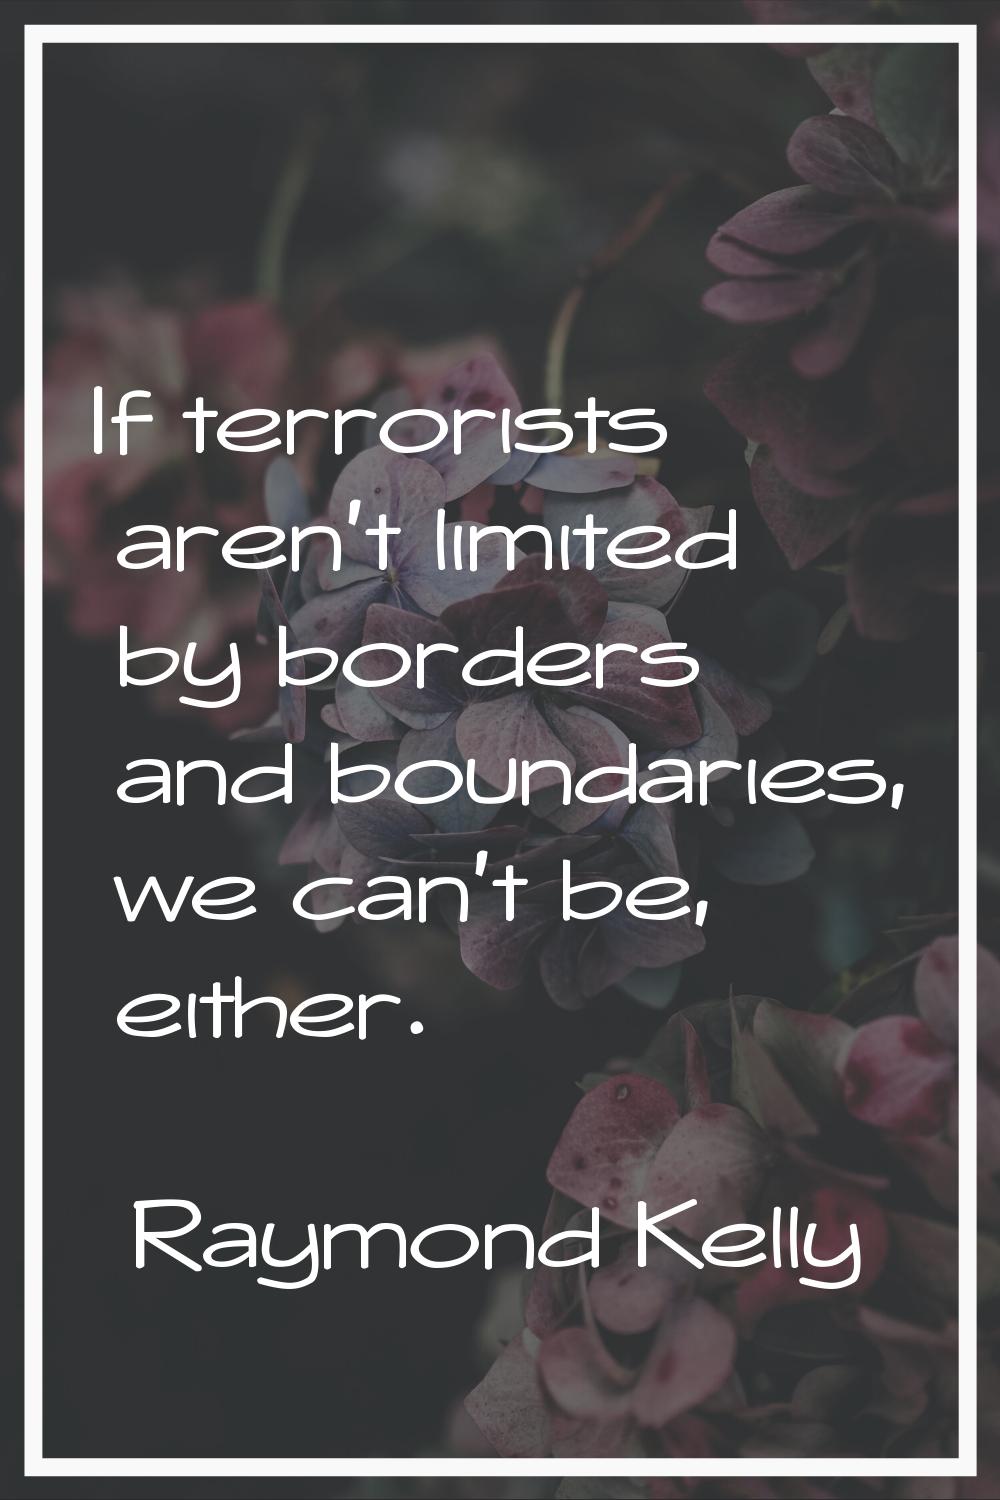 If terrorists aren't limited by borders and boundaries, we can't be, either.